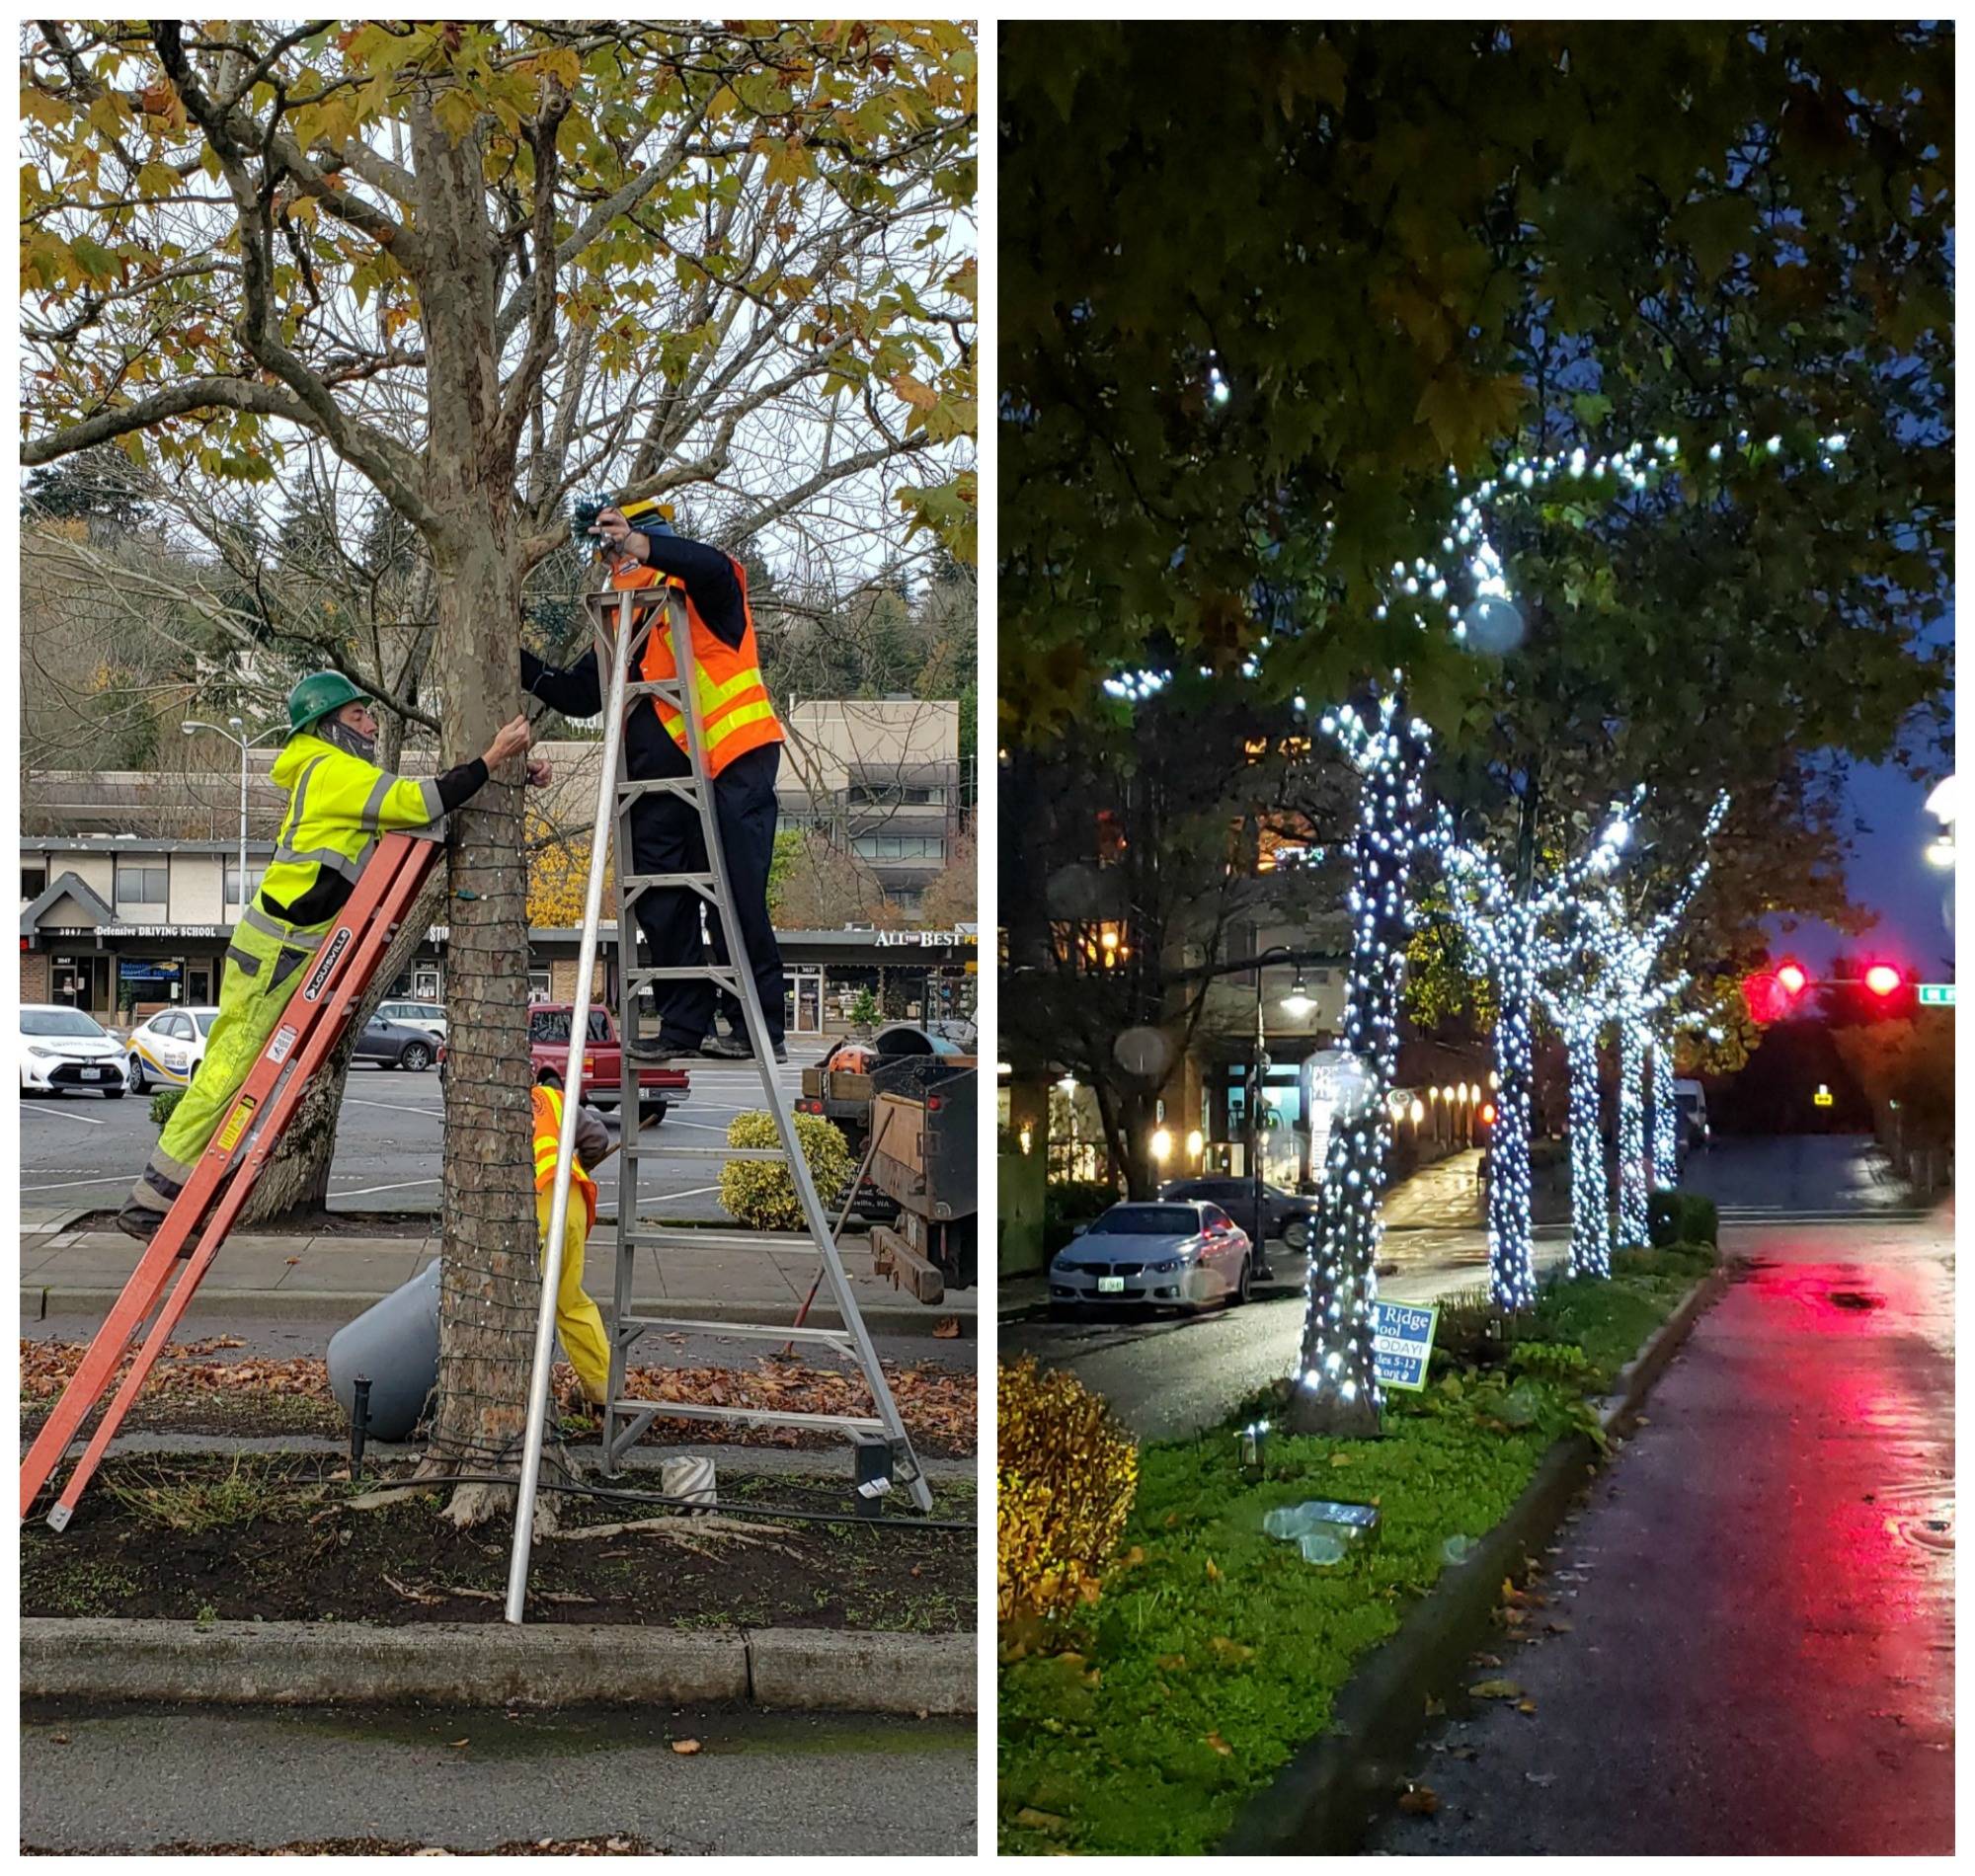 City crews installed lights in the trees in the medians along 78th Avenue from Southeast 27th Street to Mercerdale Park on Nov. 14. The Illuminate MI volunteer set-up event was canceled that day due to COVID concerns. The city is still looking for sponsors and donors to help cover the purchase of lights and other items. Interested residents and organizations can call 206-275-7626 or email miparks@mercerisland.gov through Nov. 25. The city will soon be putting up lights in Mercerdale Park and the Sculpture Gallery. For details, visit: <a href="https://letstalk.mercergov.org/illuminate-mi" target="_blank">https://letstalk.mercergov.org/illuminate-mi</a>. Photos courtesy of the city of Mercer Island